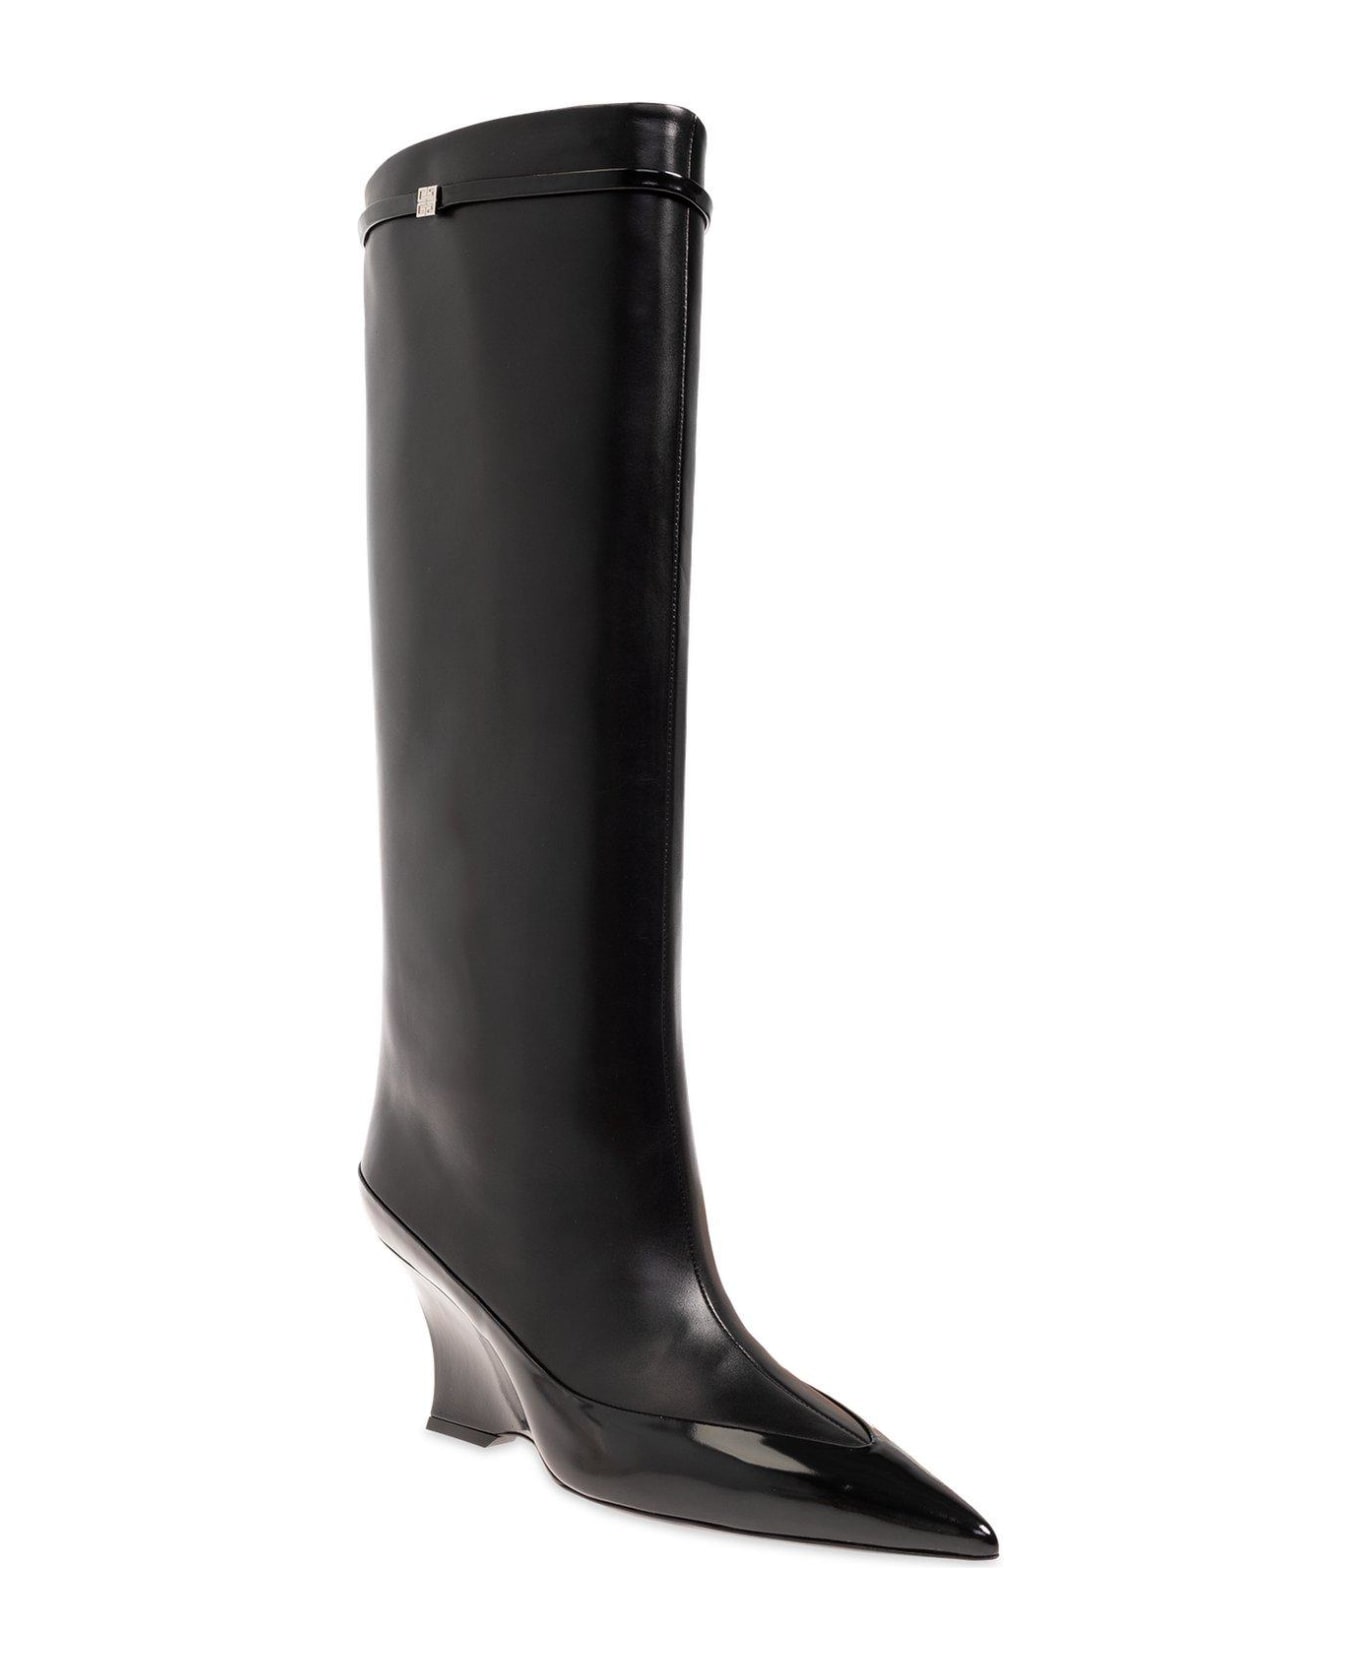 Givenchy Raven Pointed-toe Boots - Black ブーツ